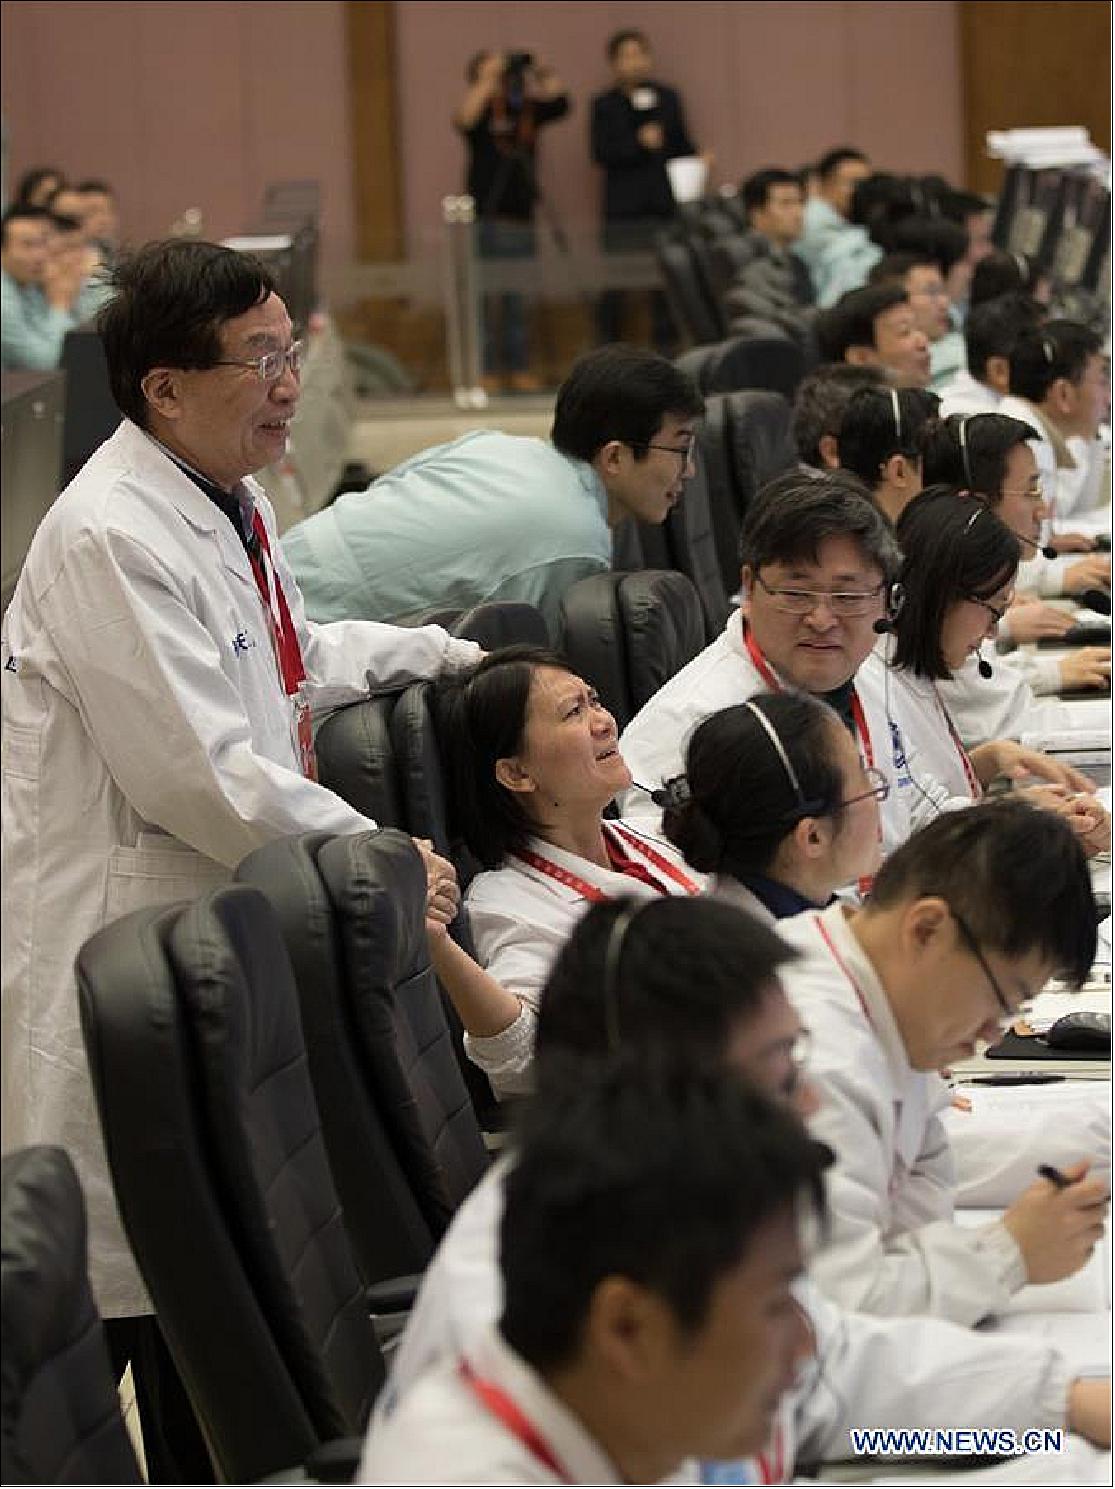 Figure 31: Technicians celebrate after the landing of the Chang'e-4 lunar probe, at the Beijing Aerospace Control Center (BACC) in Beijing, China on 3 January 2019 (image credit: Xinhua)